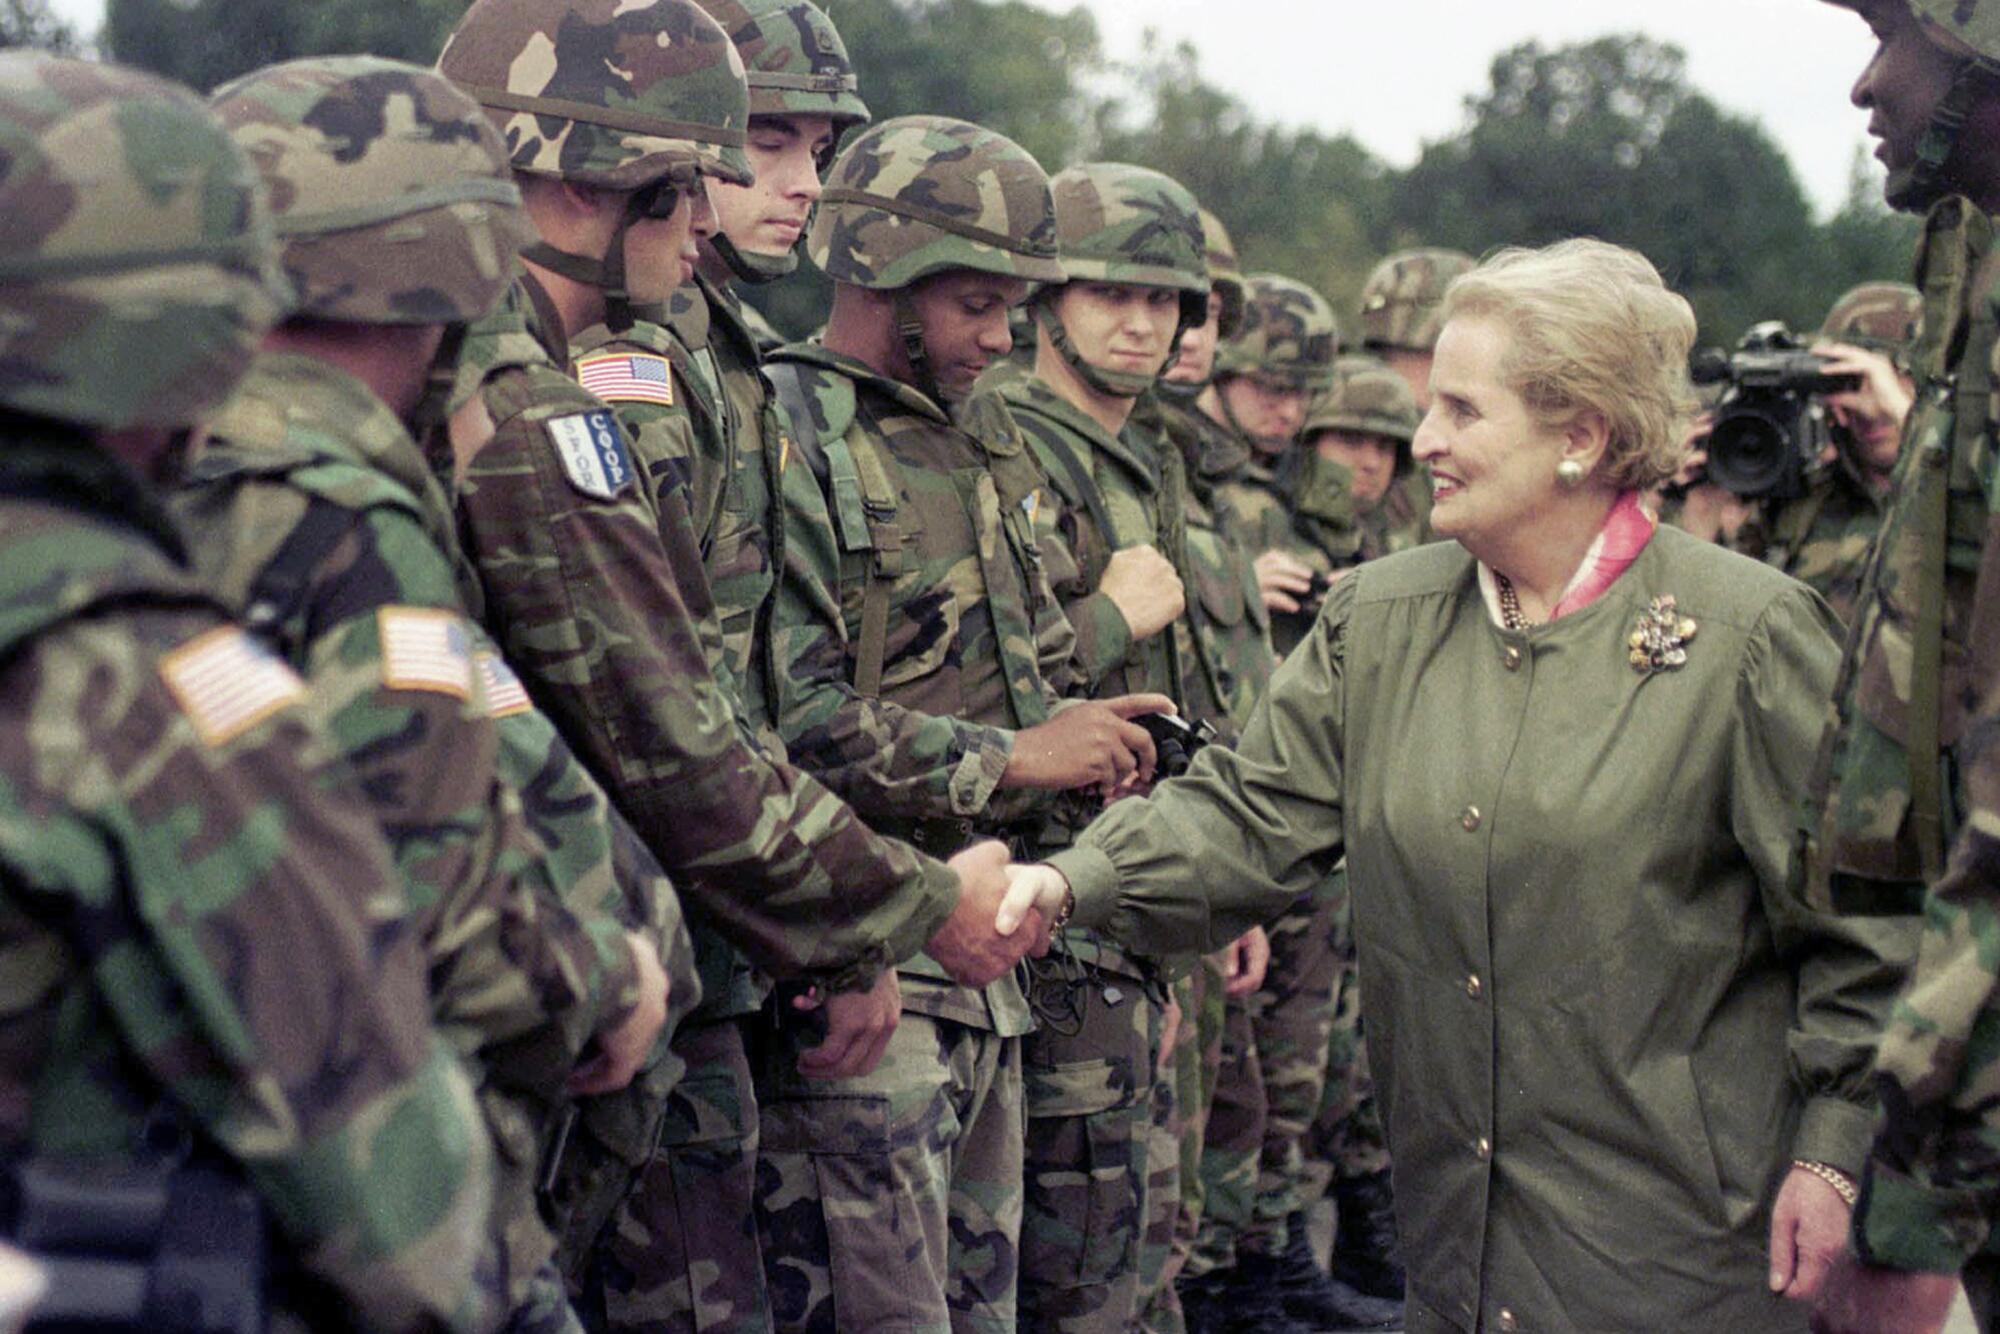 Madeleine Albright, then-U.S. secretary of State, shakes hands with U.S soldiers in 1998.